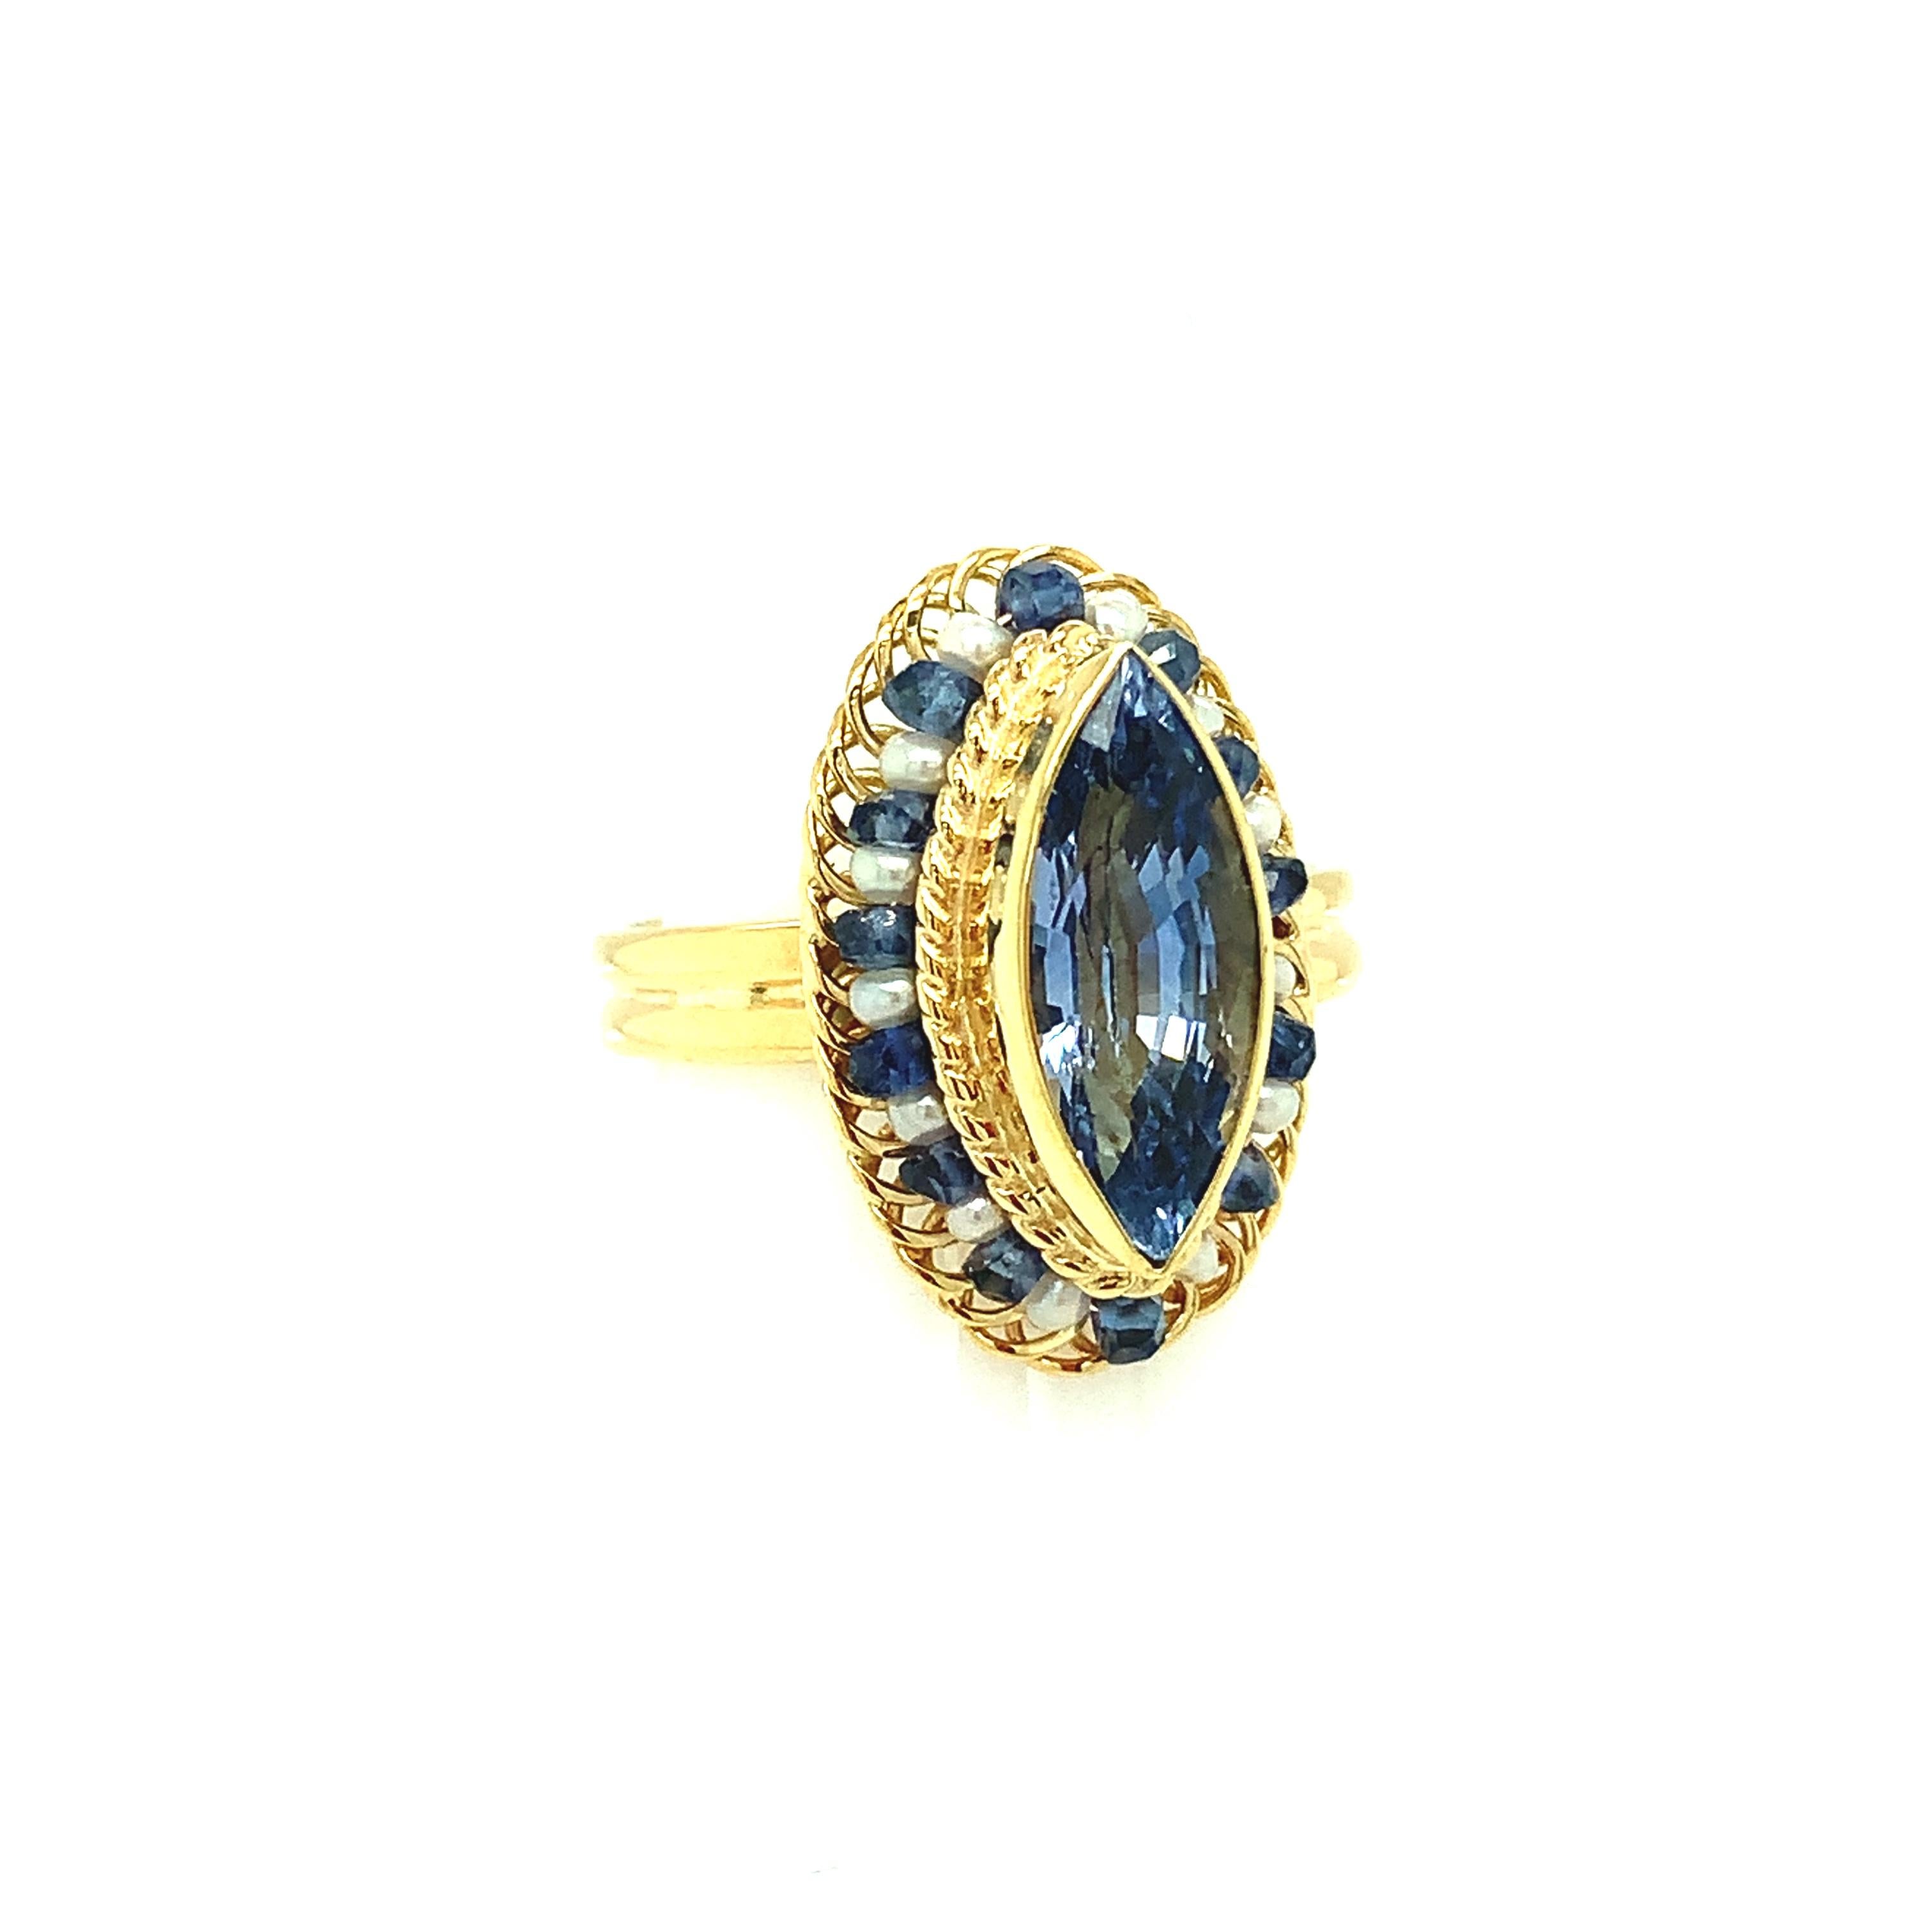 This beautifully handmade sapphire ring is one-of-a-kind! The rich blue, marquise-shaped sapphire is bordered by seed pearls and sapphire beads that have been delicately strung on 18k yellow gold wire. This design showcases the intricate form of